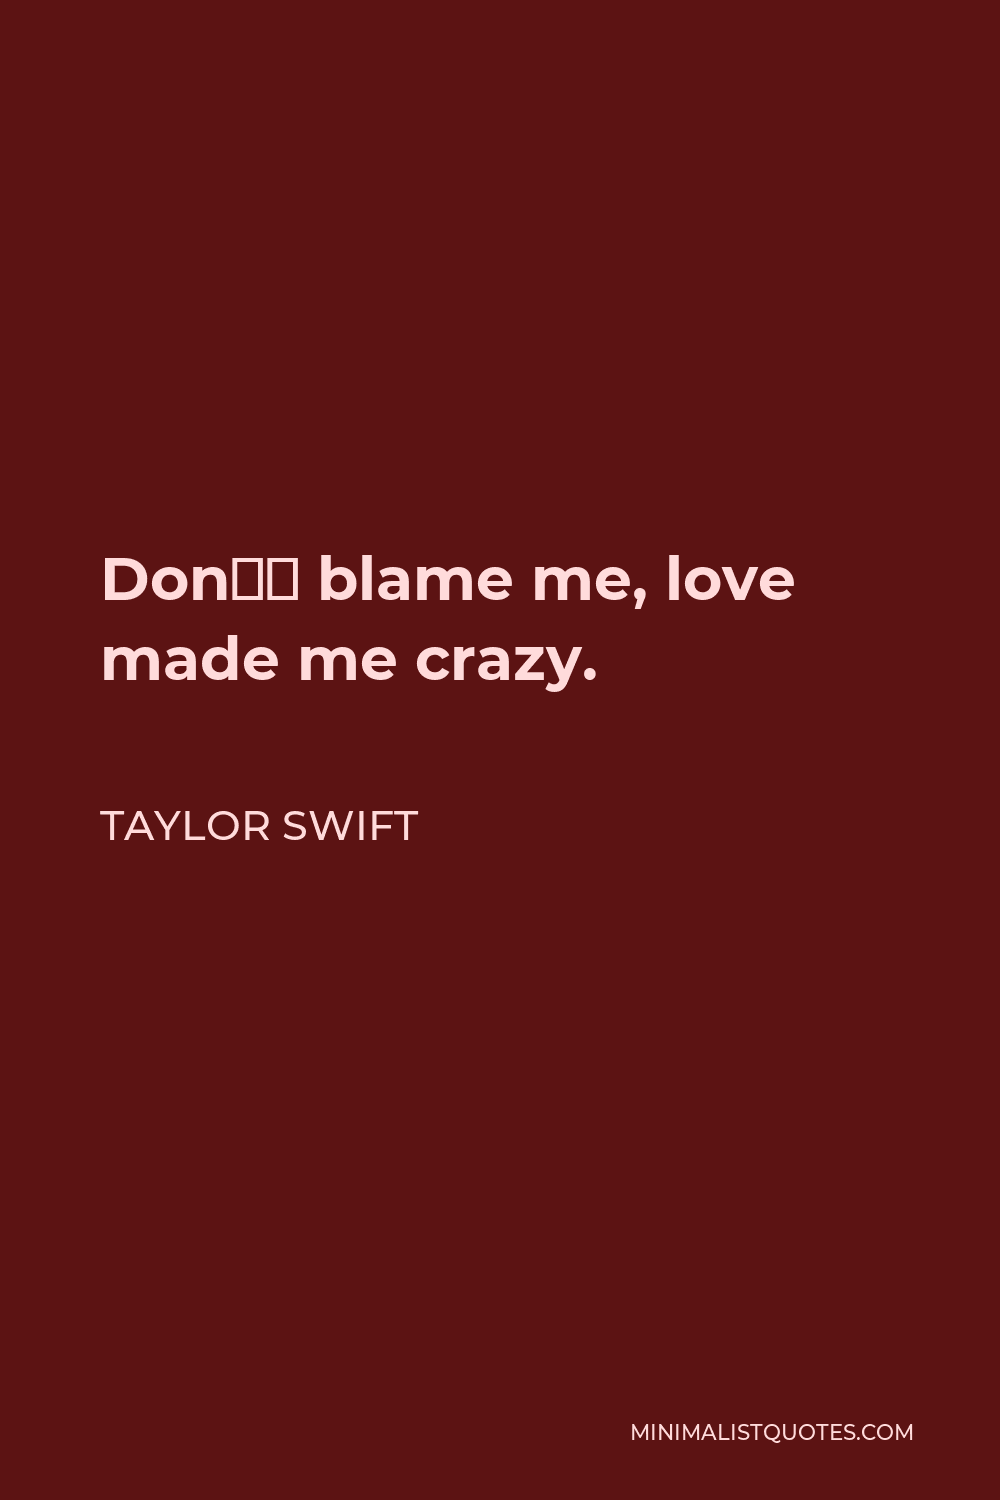 Taylor Swift quote: giving up doesn't always mean your weak